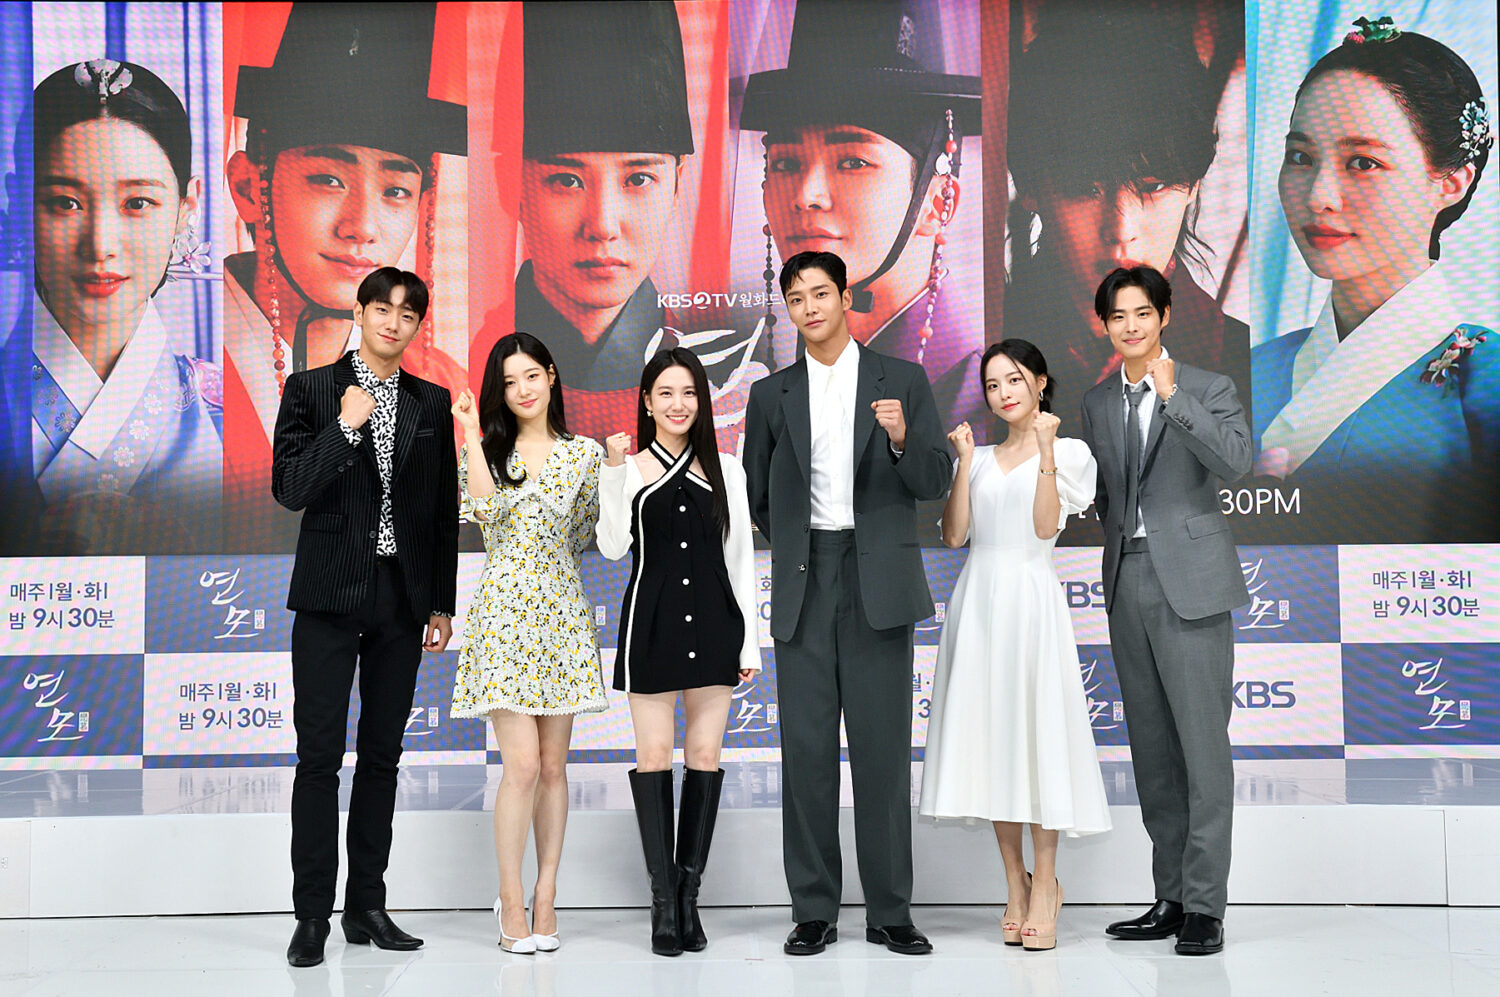 Press Conference] The Cast of The King's Affection talks about their  chemistry and more · K-POPPED!